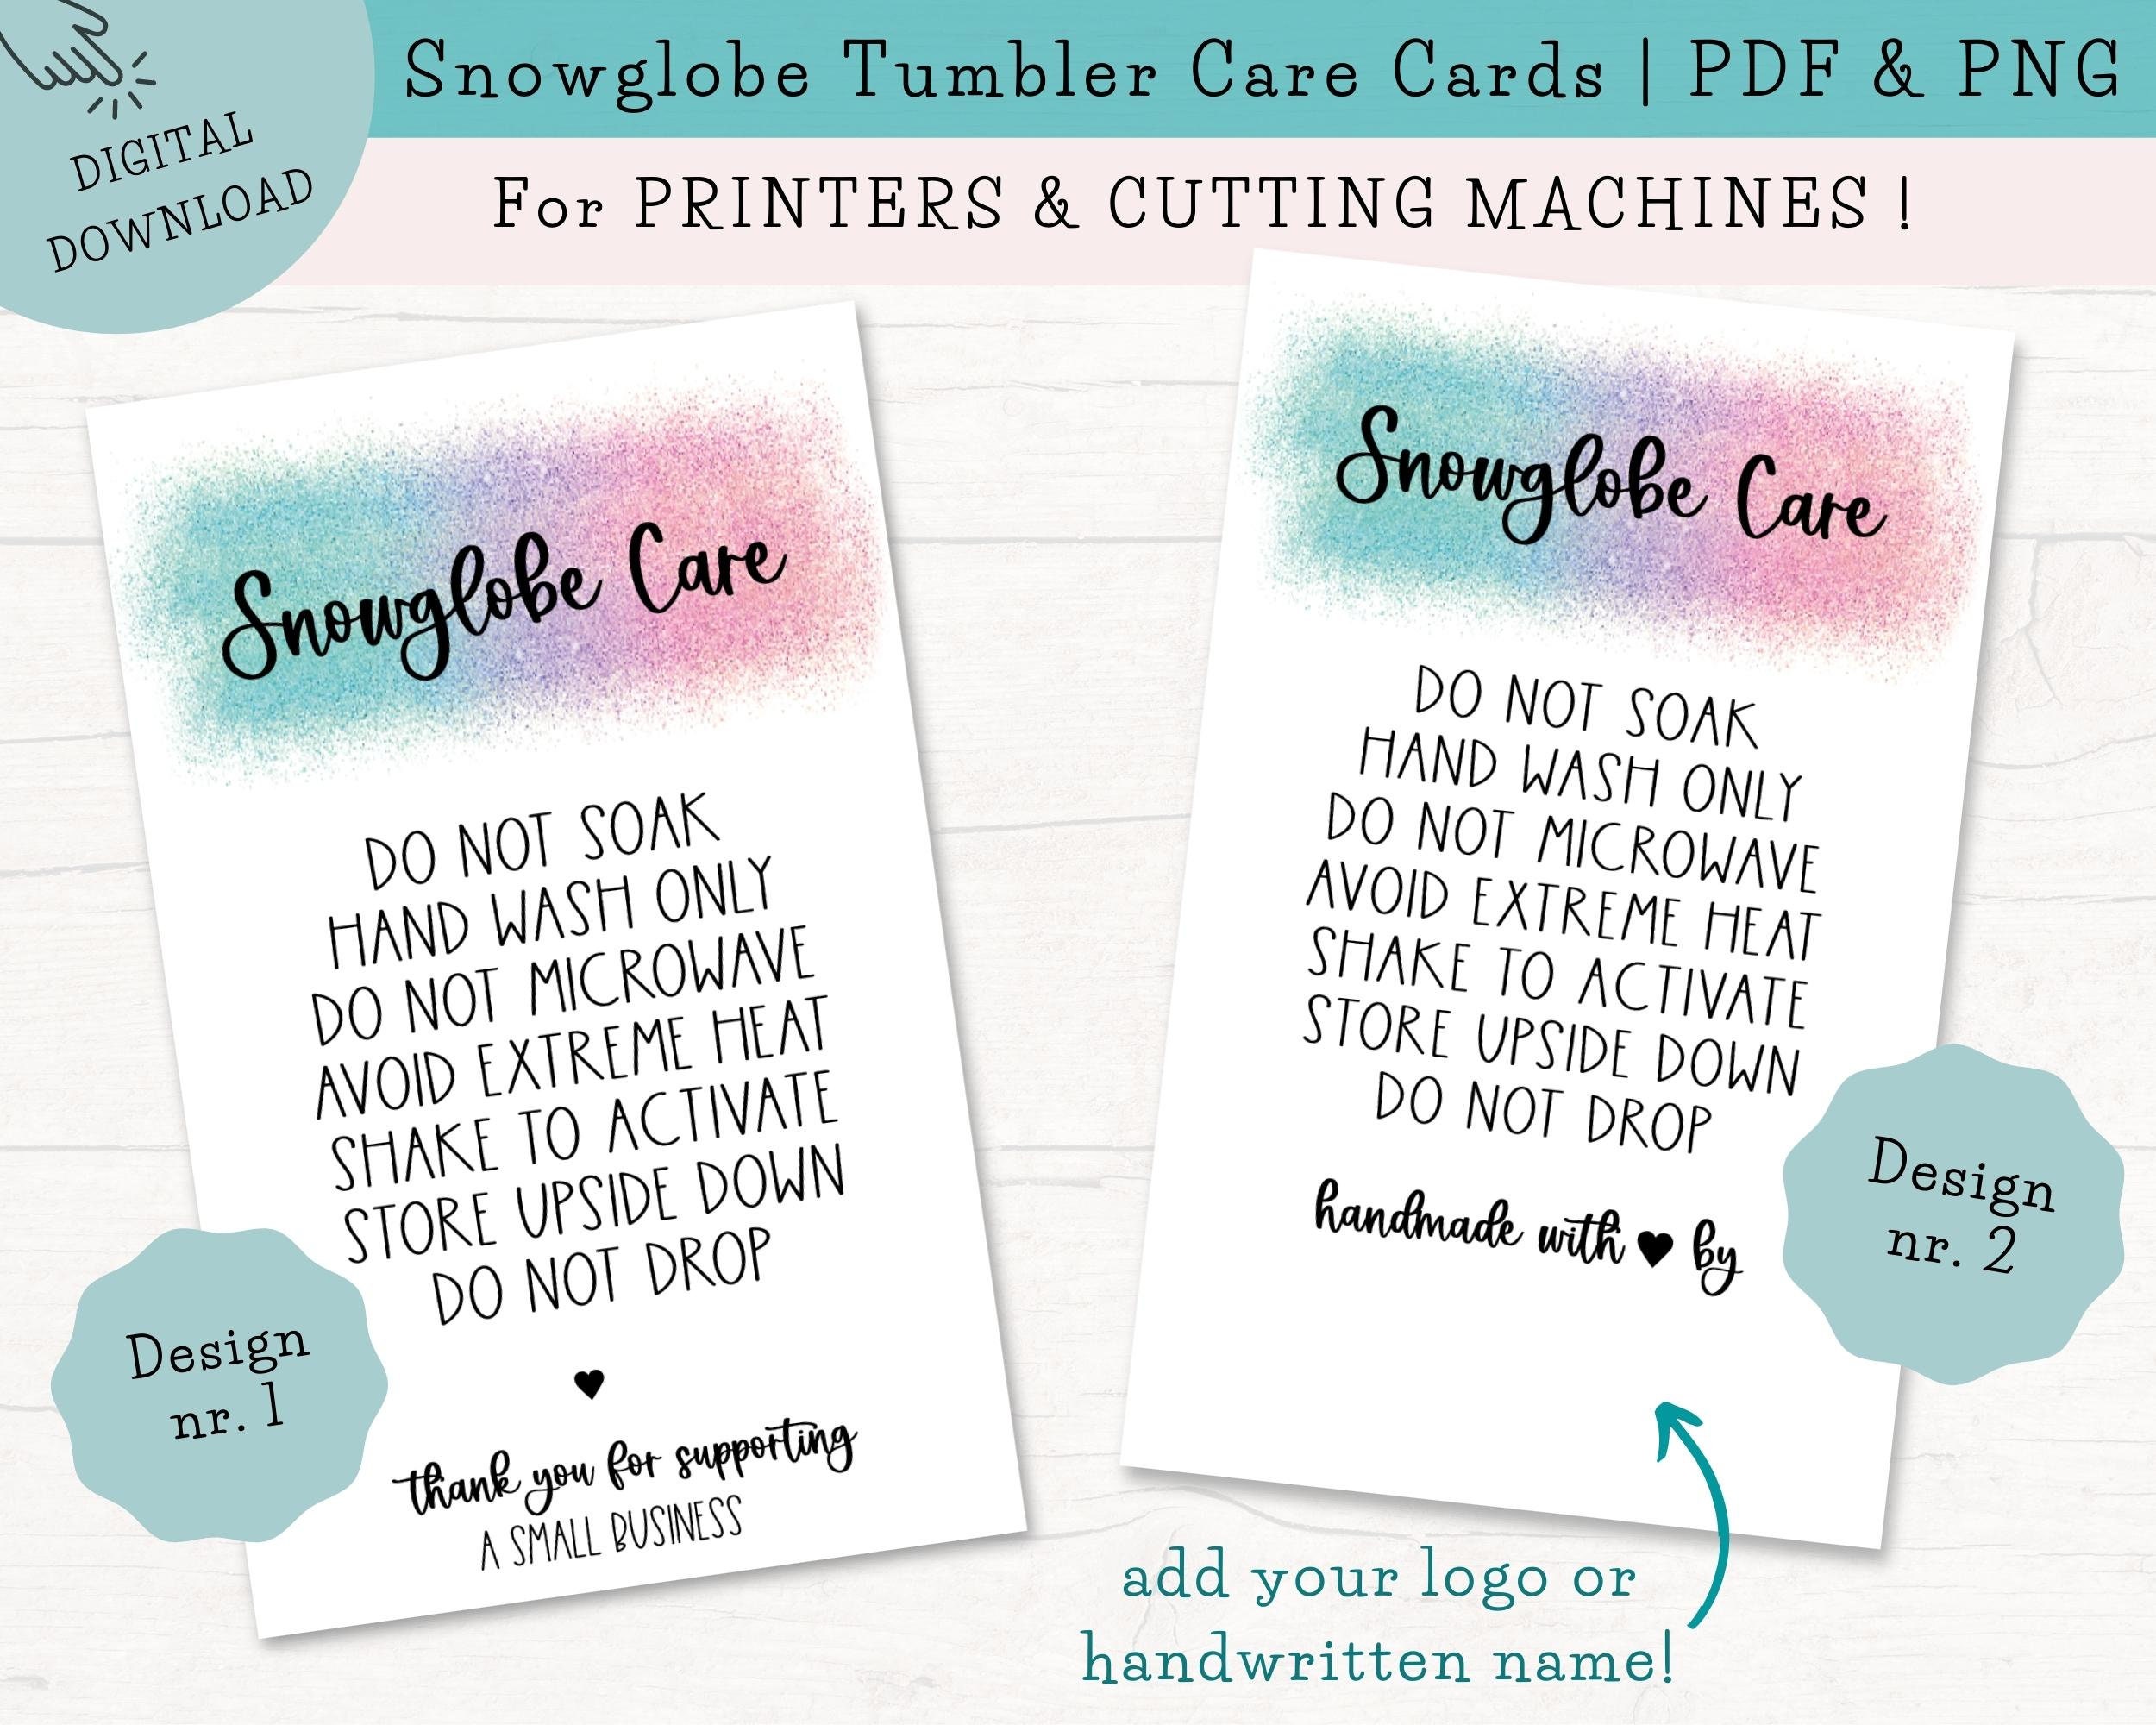 Snowglobe Tumbler Care Cards Customizable, Snowglobe Care Instructions,  Ready to Print, Print and Cut, PDF & PNG 